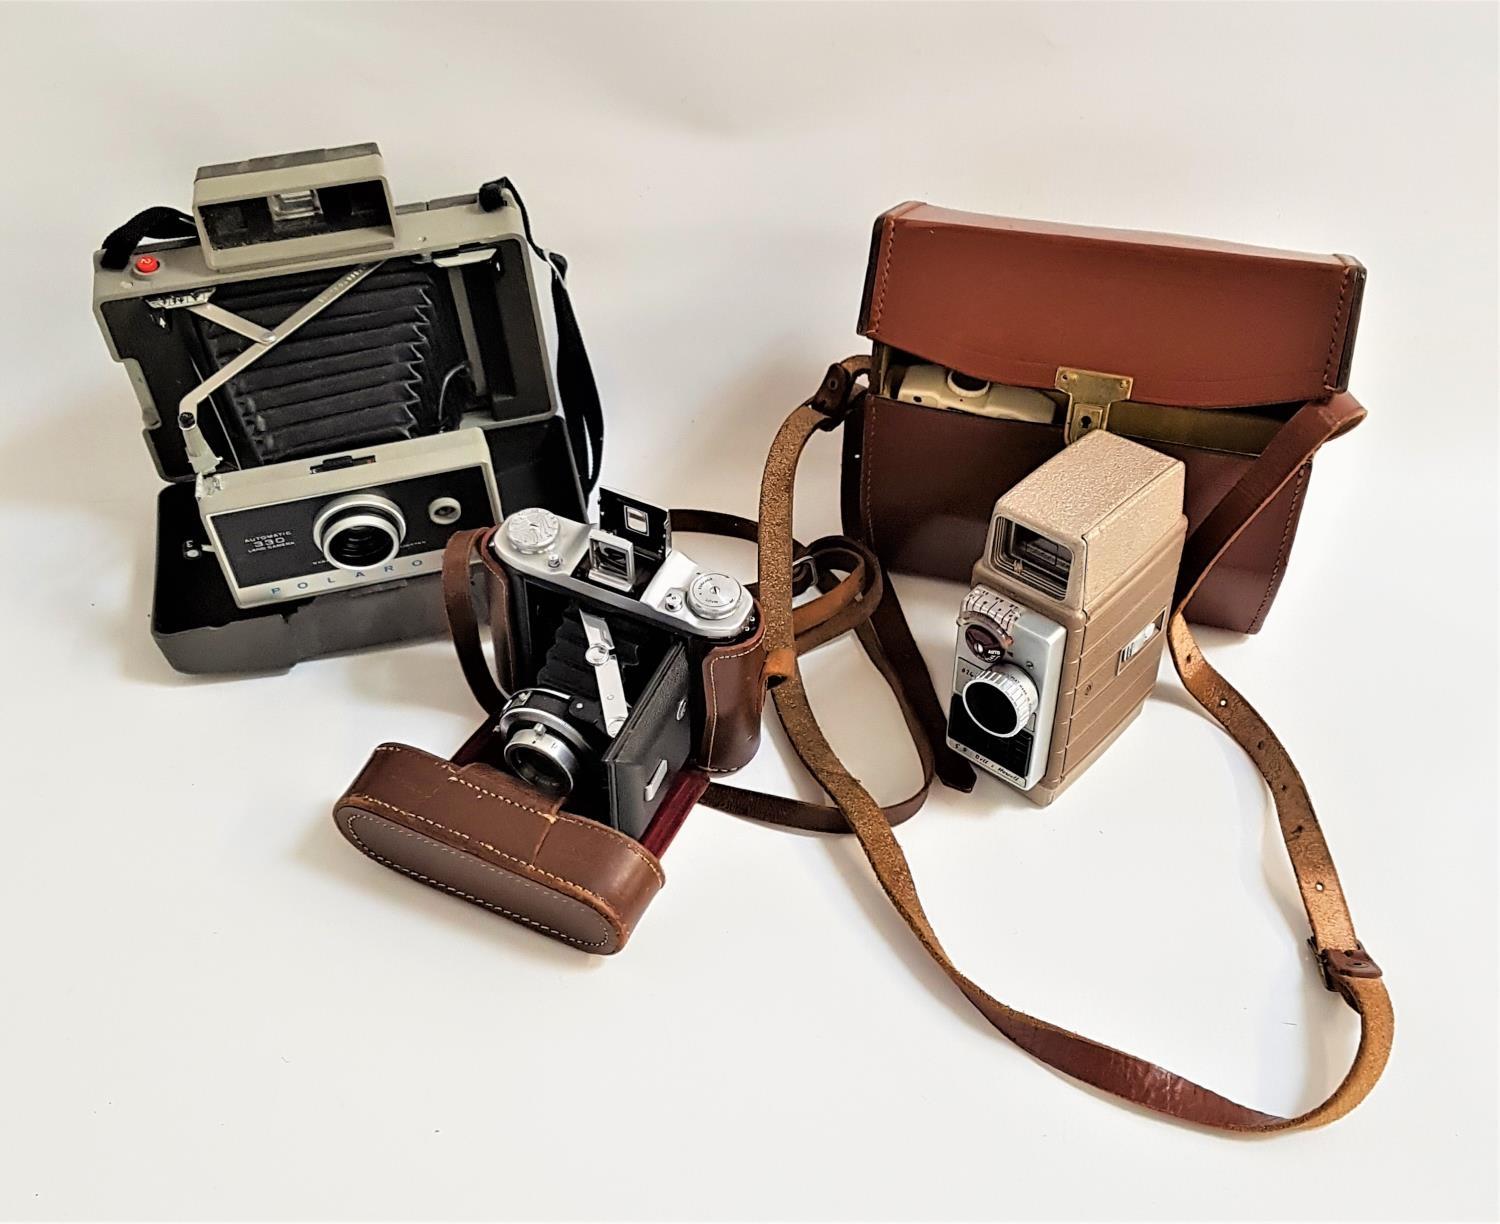 SELECTION OF PHOTOGRAPHIC CAMERAS including a cased Polaroid Automatic 330 Land Camera, a cased